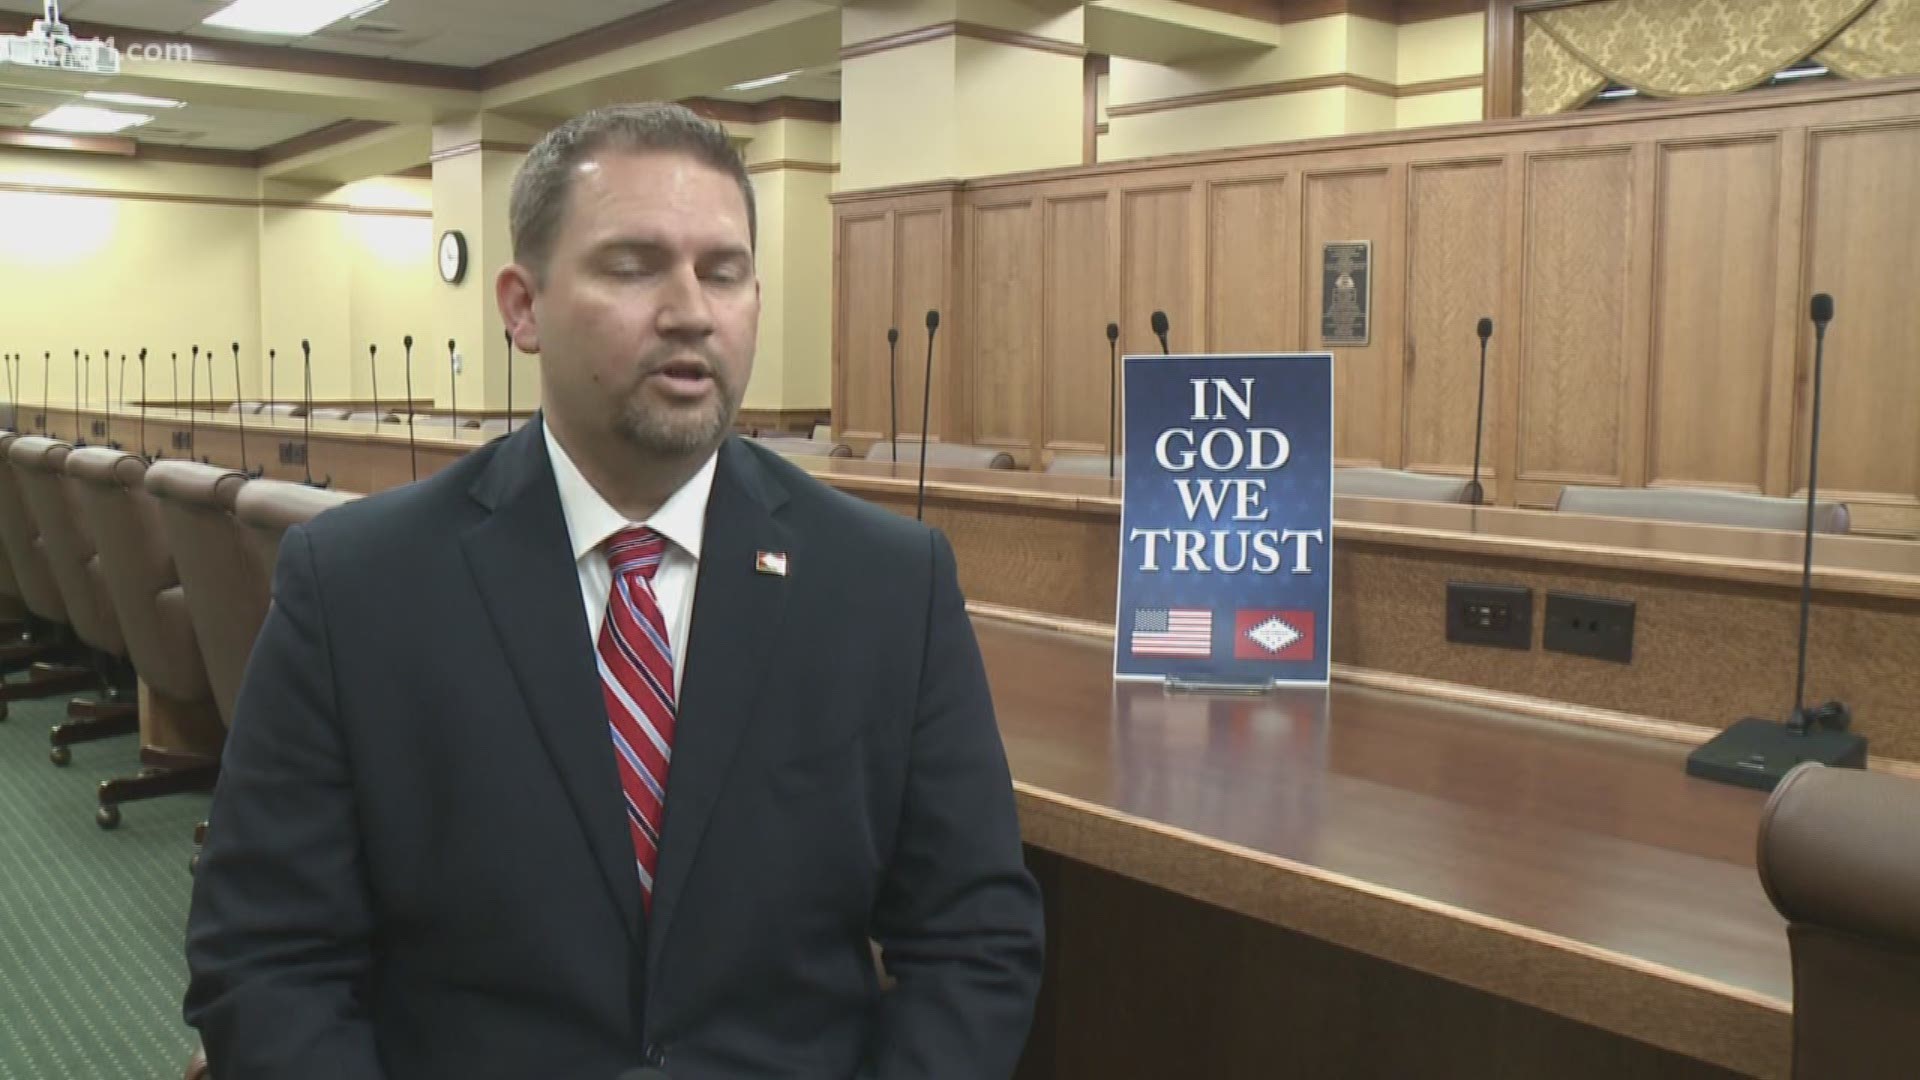 Bentonville Schools will soon display In God We Trust signs as part of a new law in Arkansas.